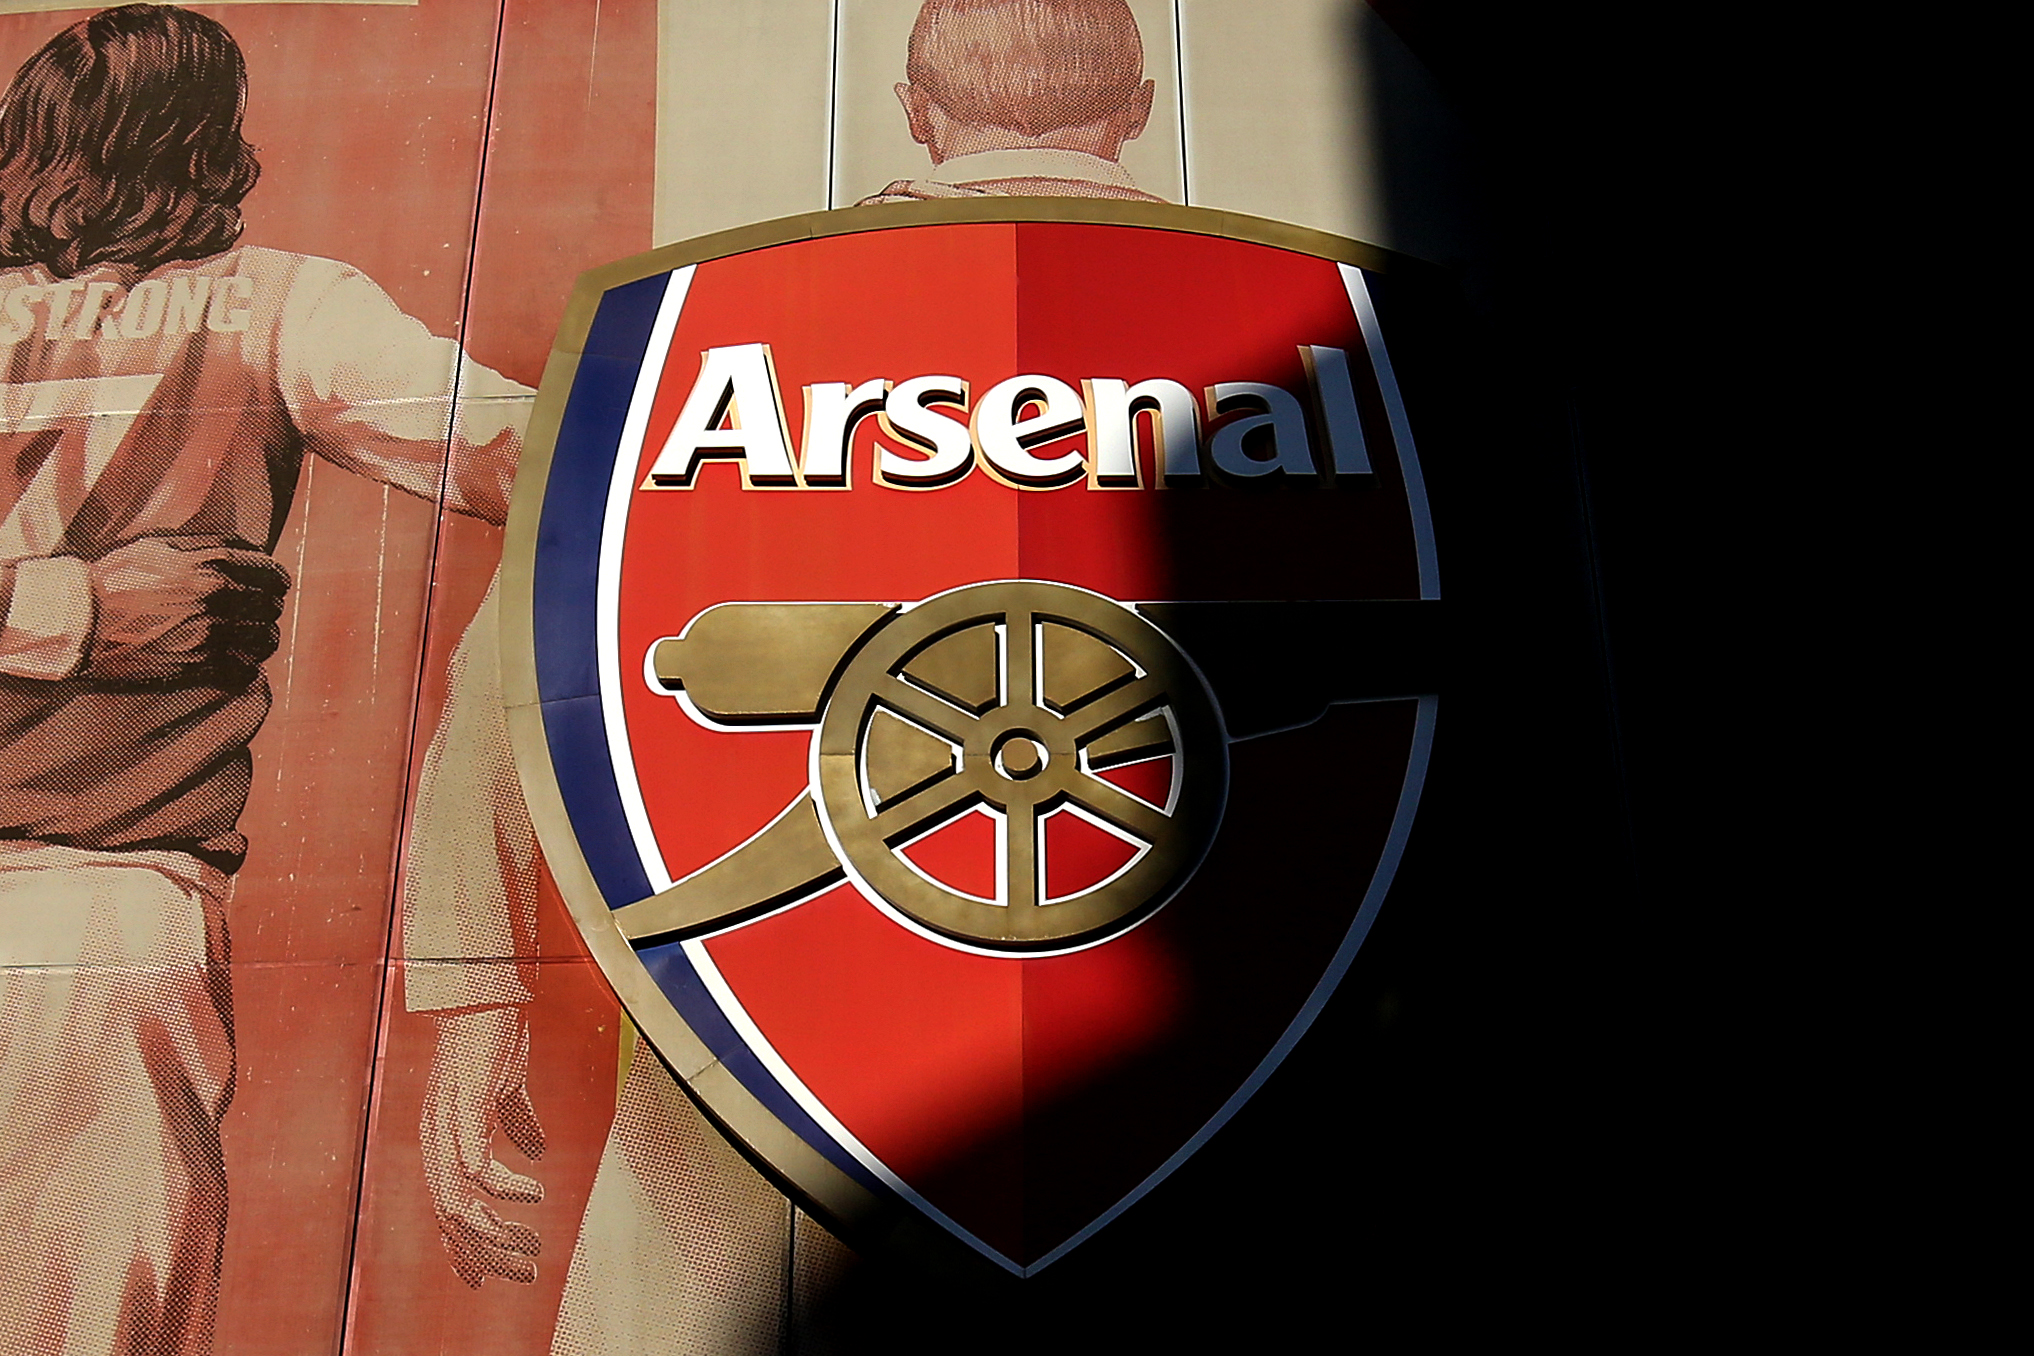 Arsenal Loan Watch: Catch up on the latest news and updates about loaned Gunners stars